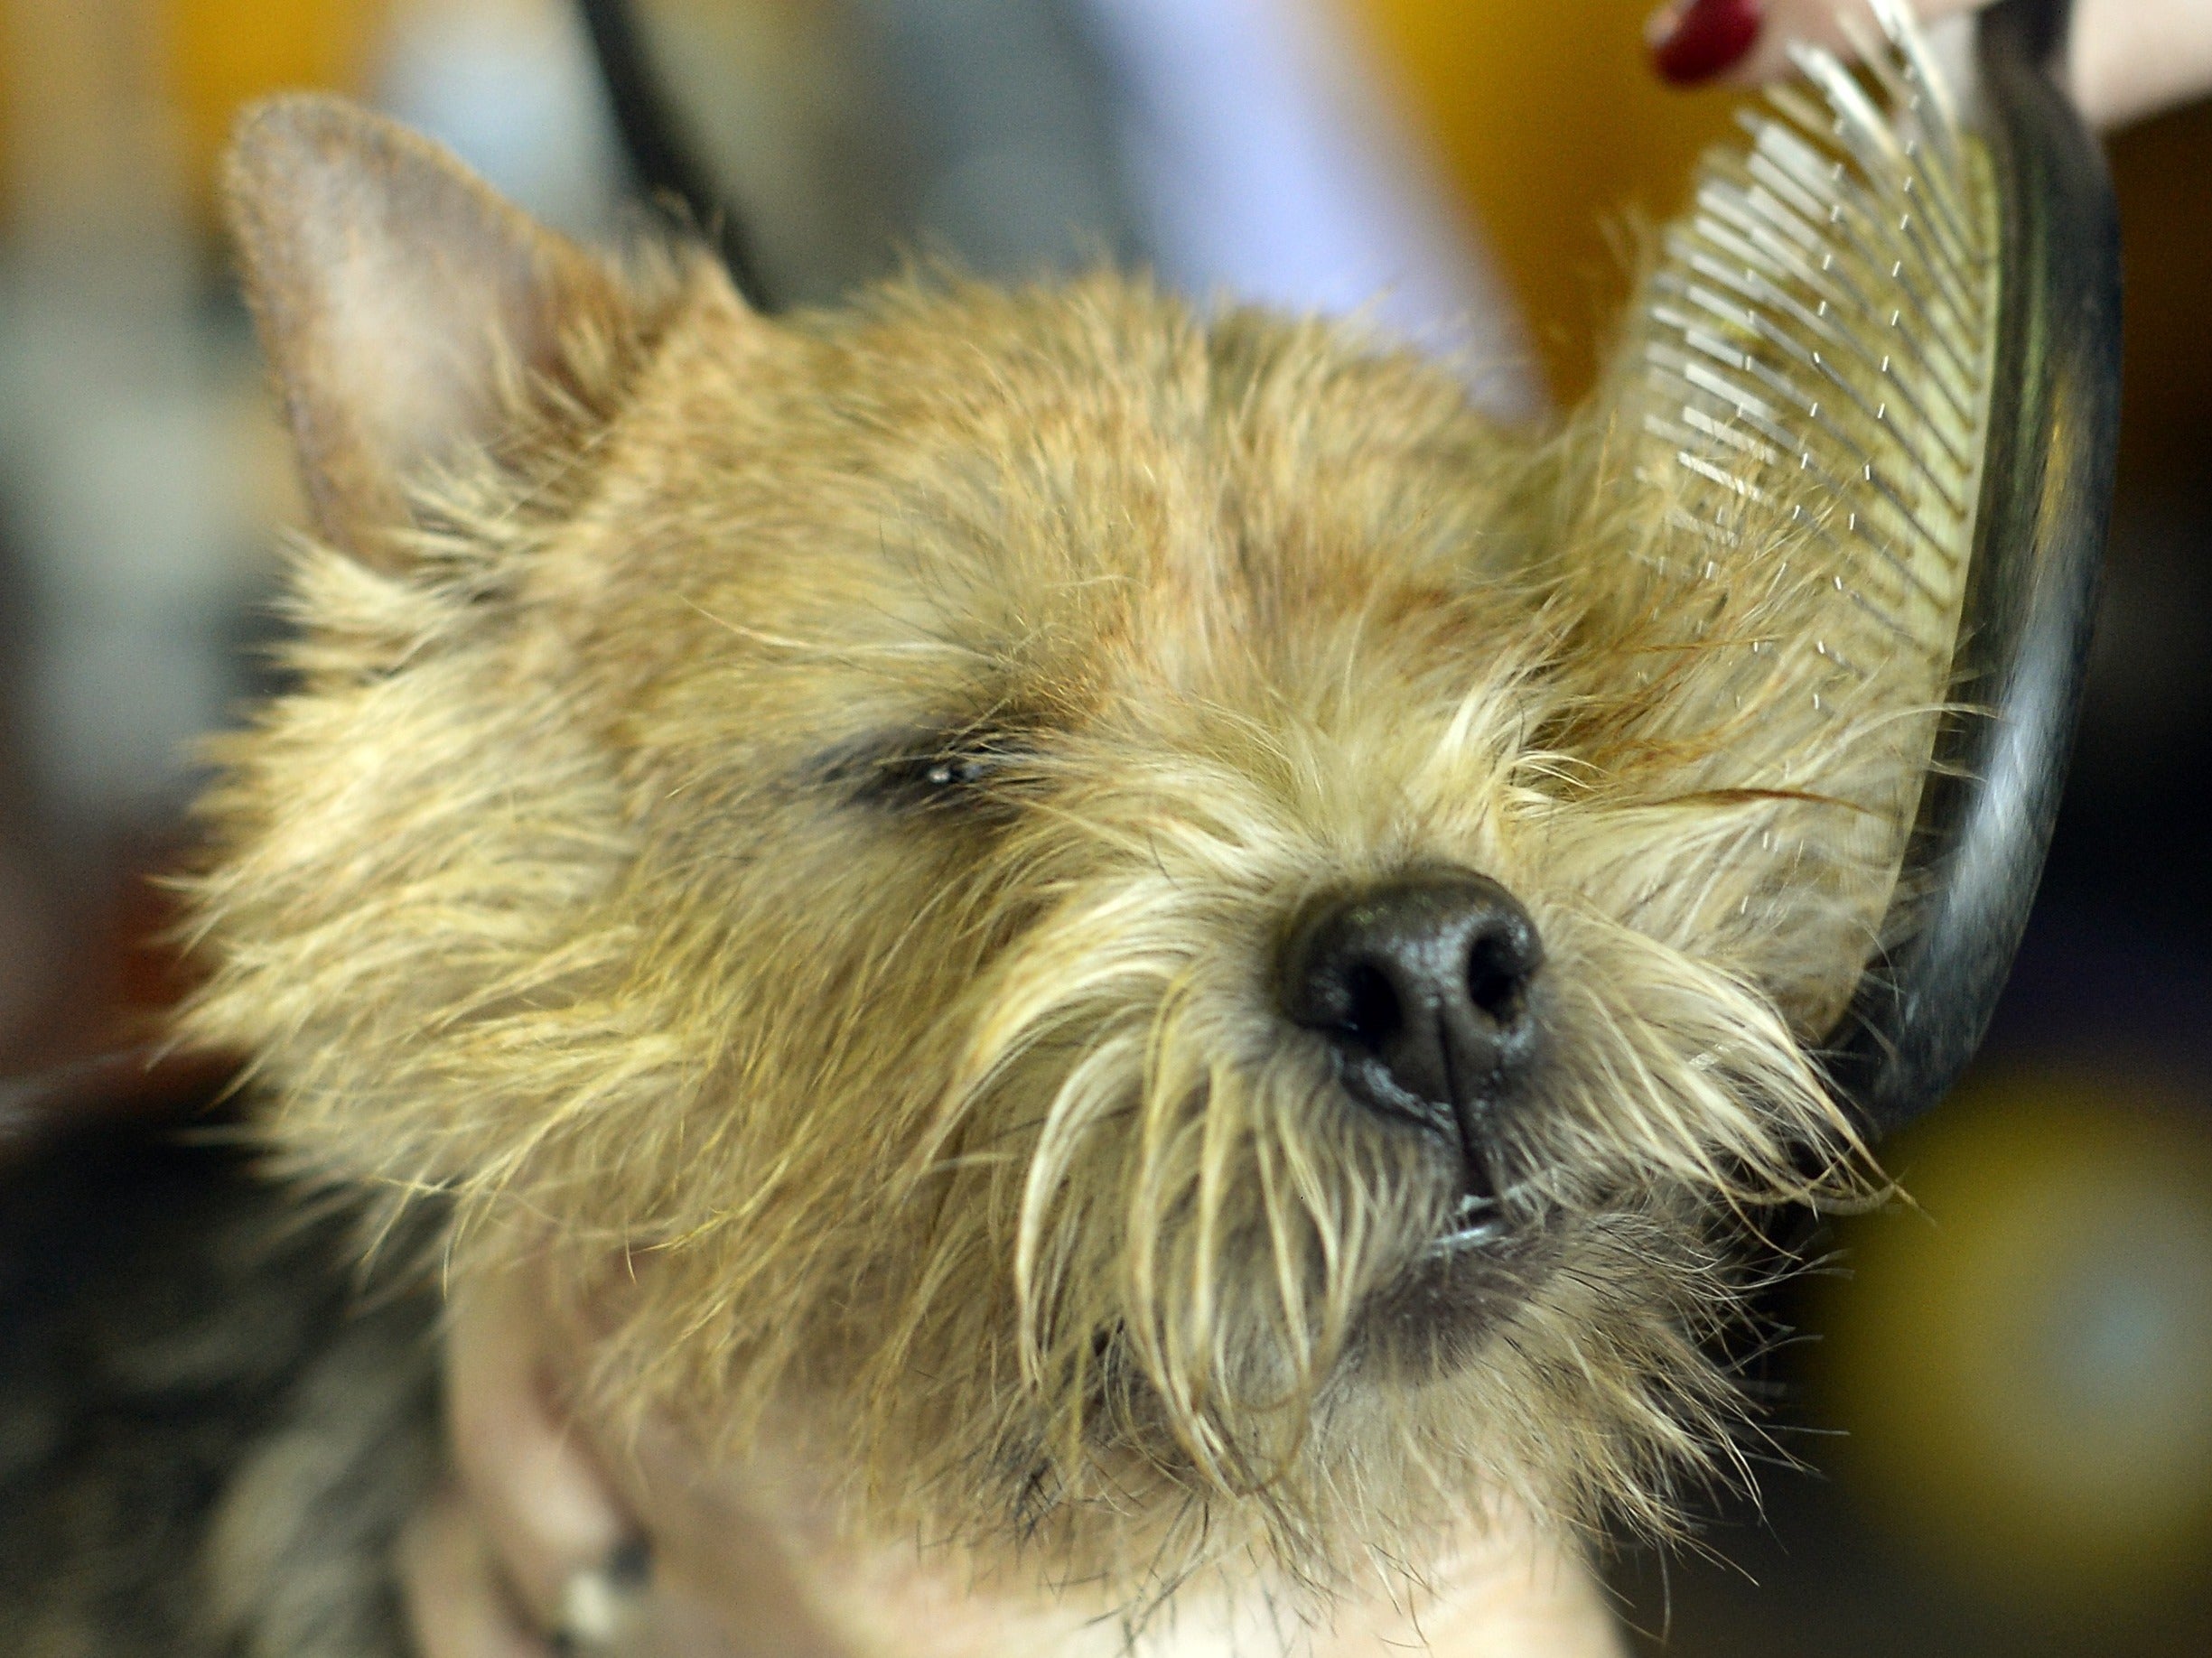 A Norwich terrier photographed in New York City